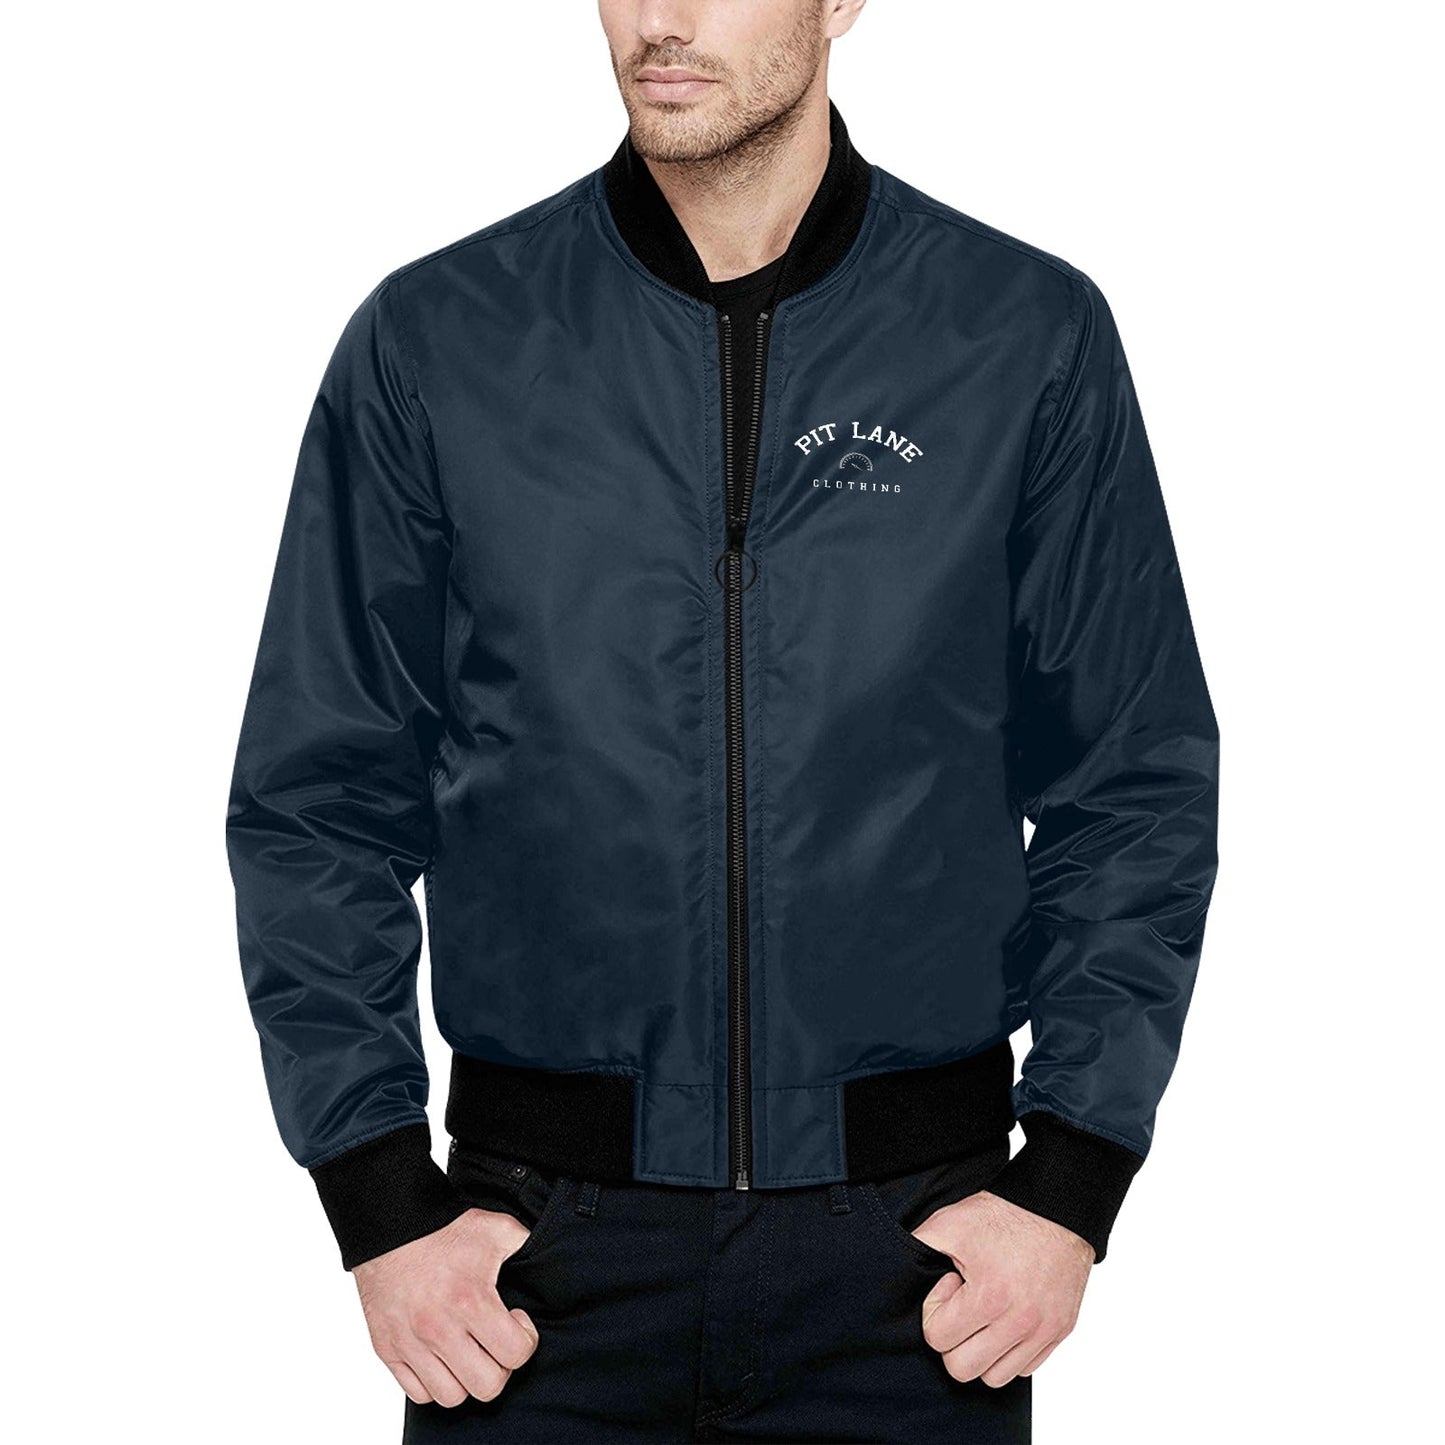 PIT LANE CLOTHING Quilted Bomber Jacket